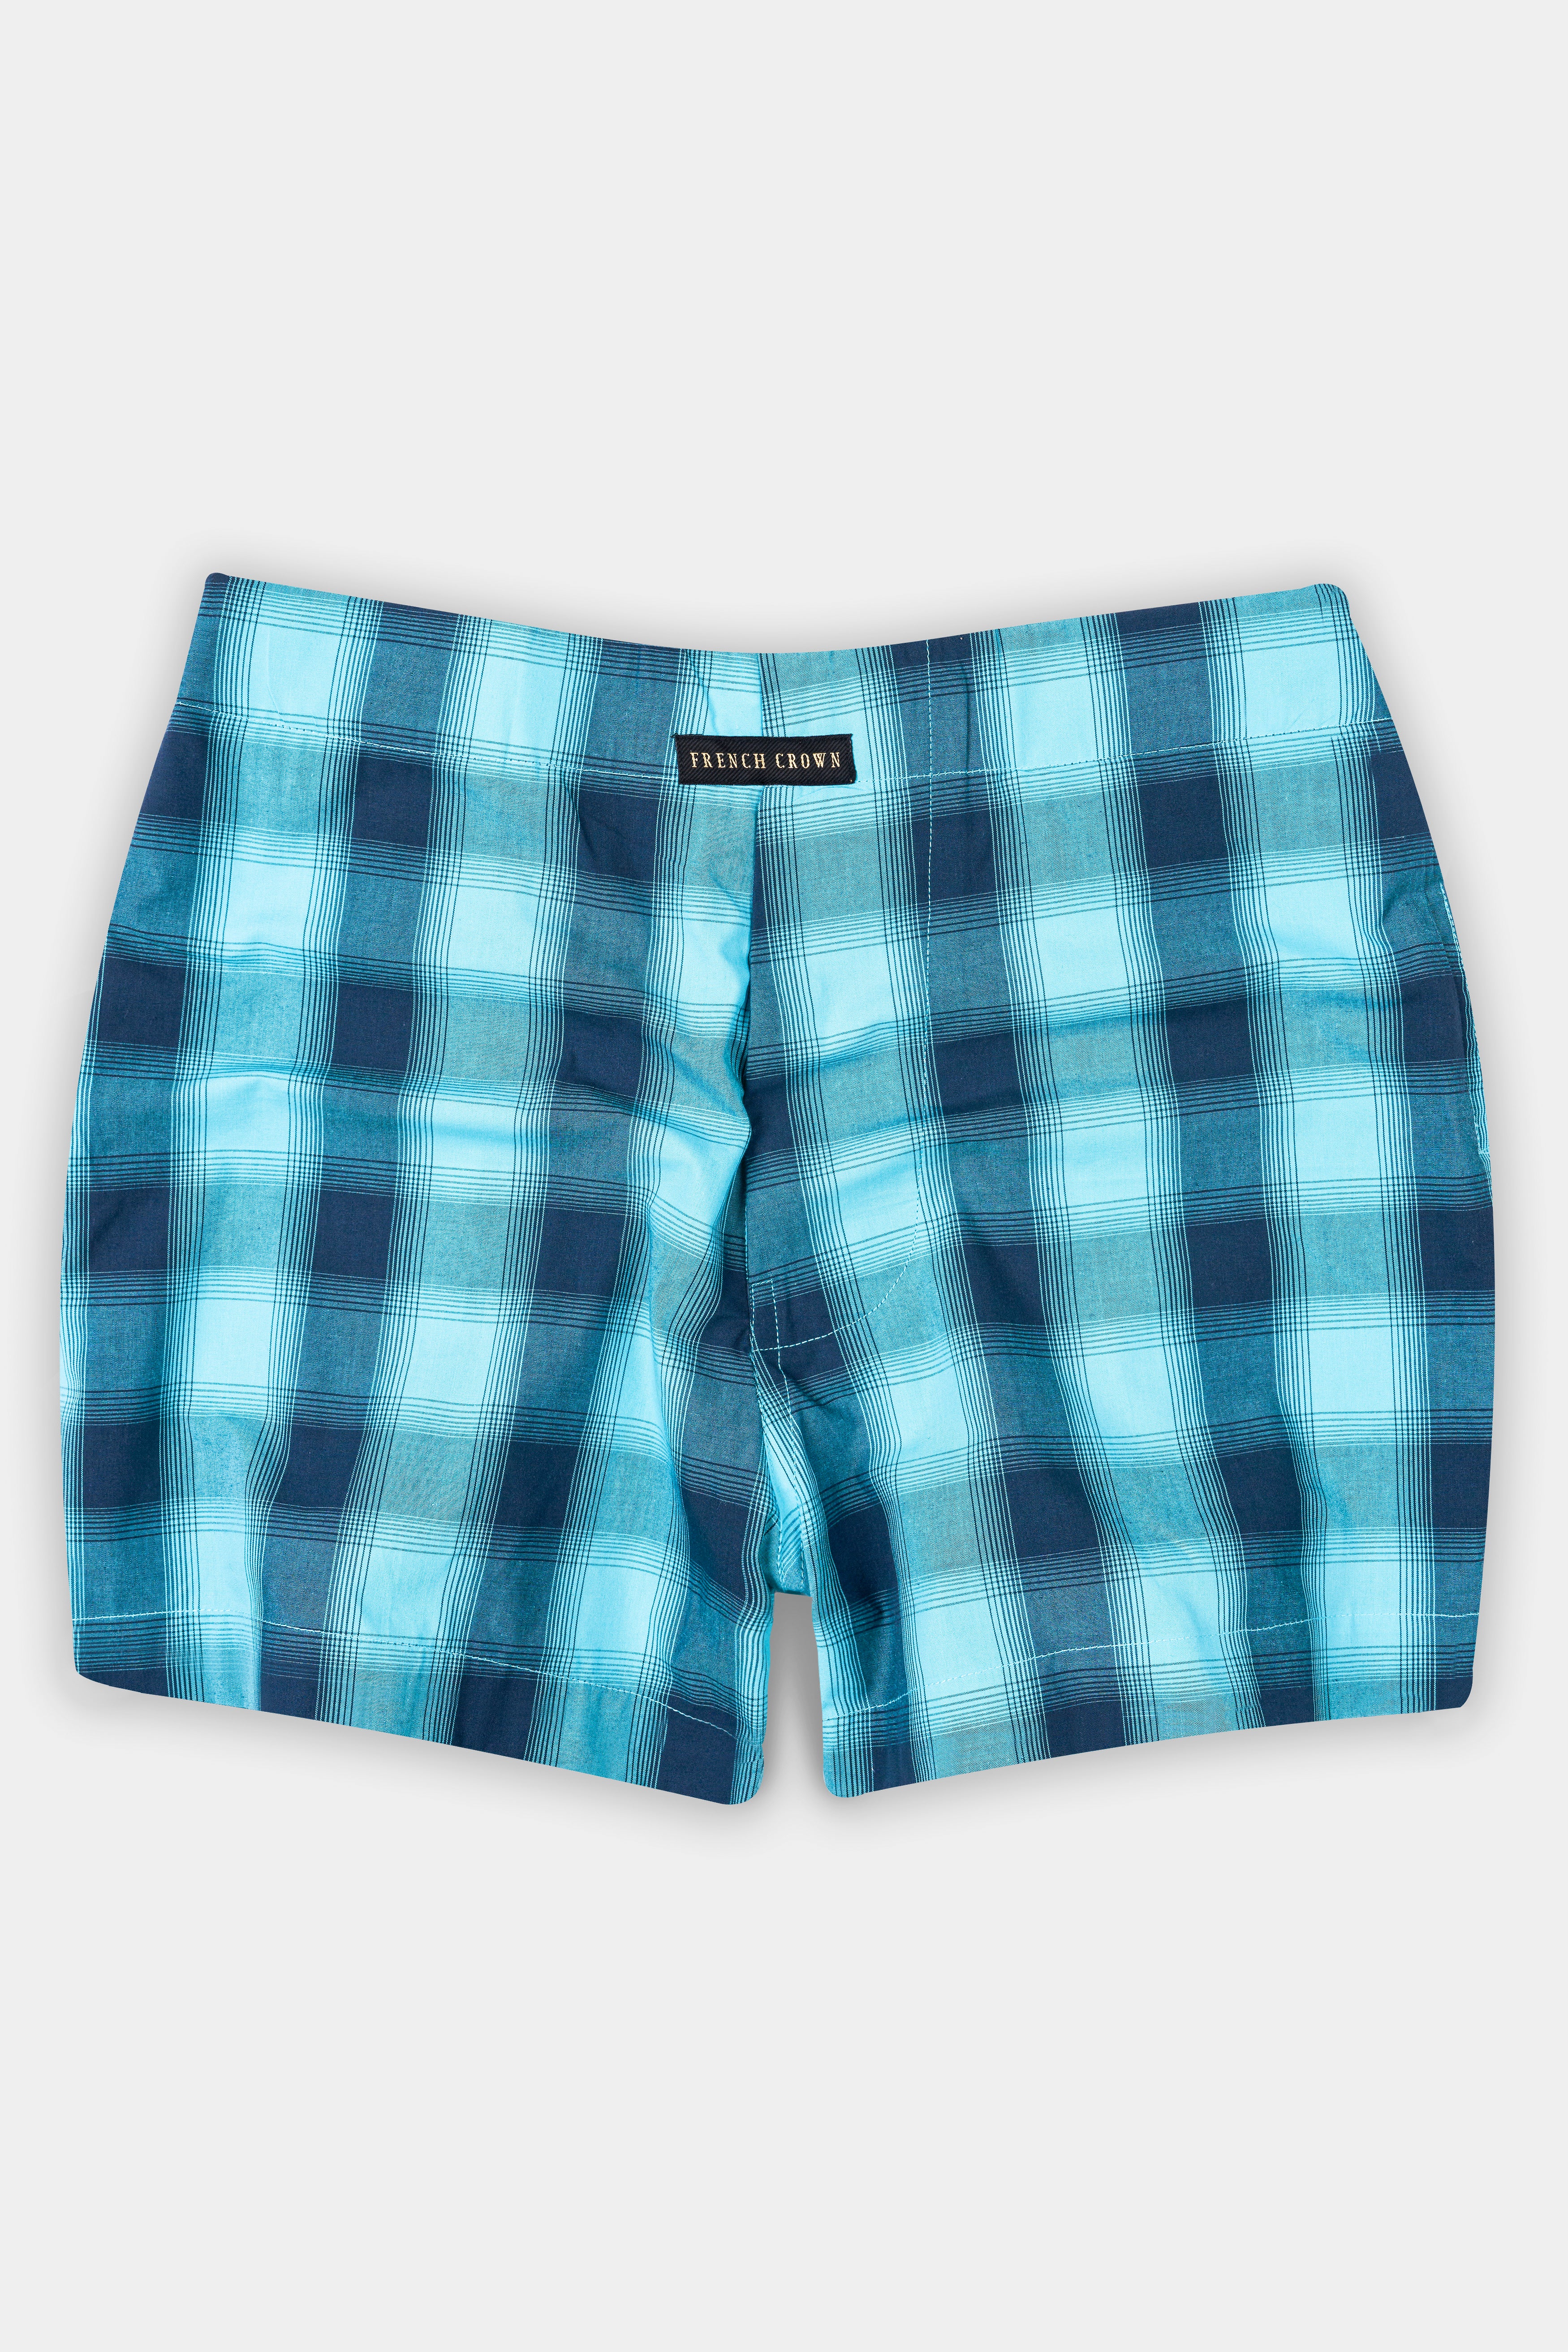 Bizzard Blue With Nile Navy Blue Checkered Premium Cotton Boxer BX535-28, BX535-30, BX535-32, BX535-34, BX535-36, BX535-38, BX535-40, BX535-42, BX535-44